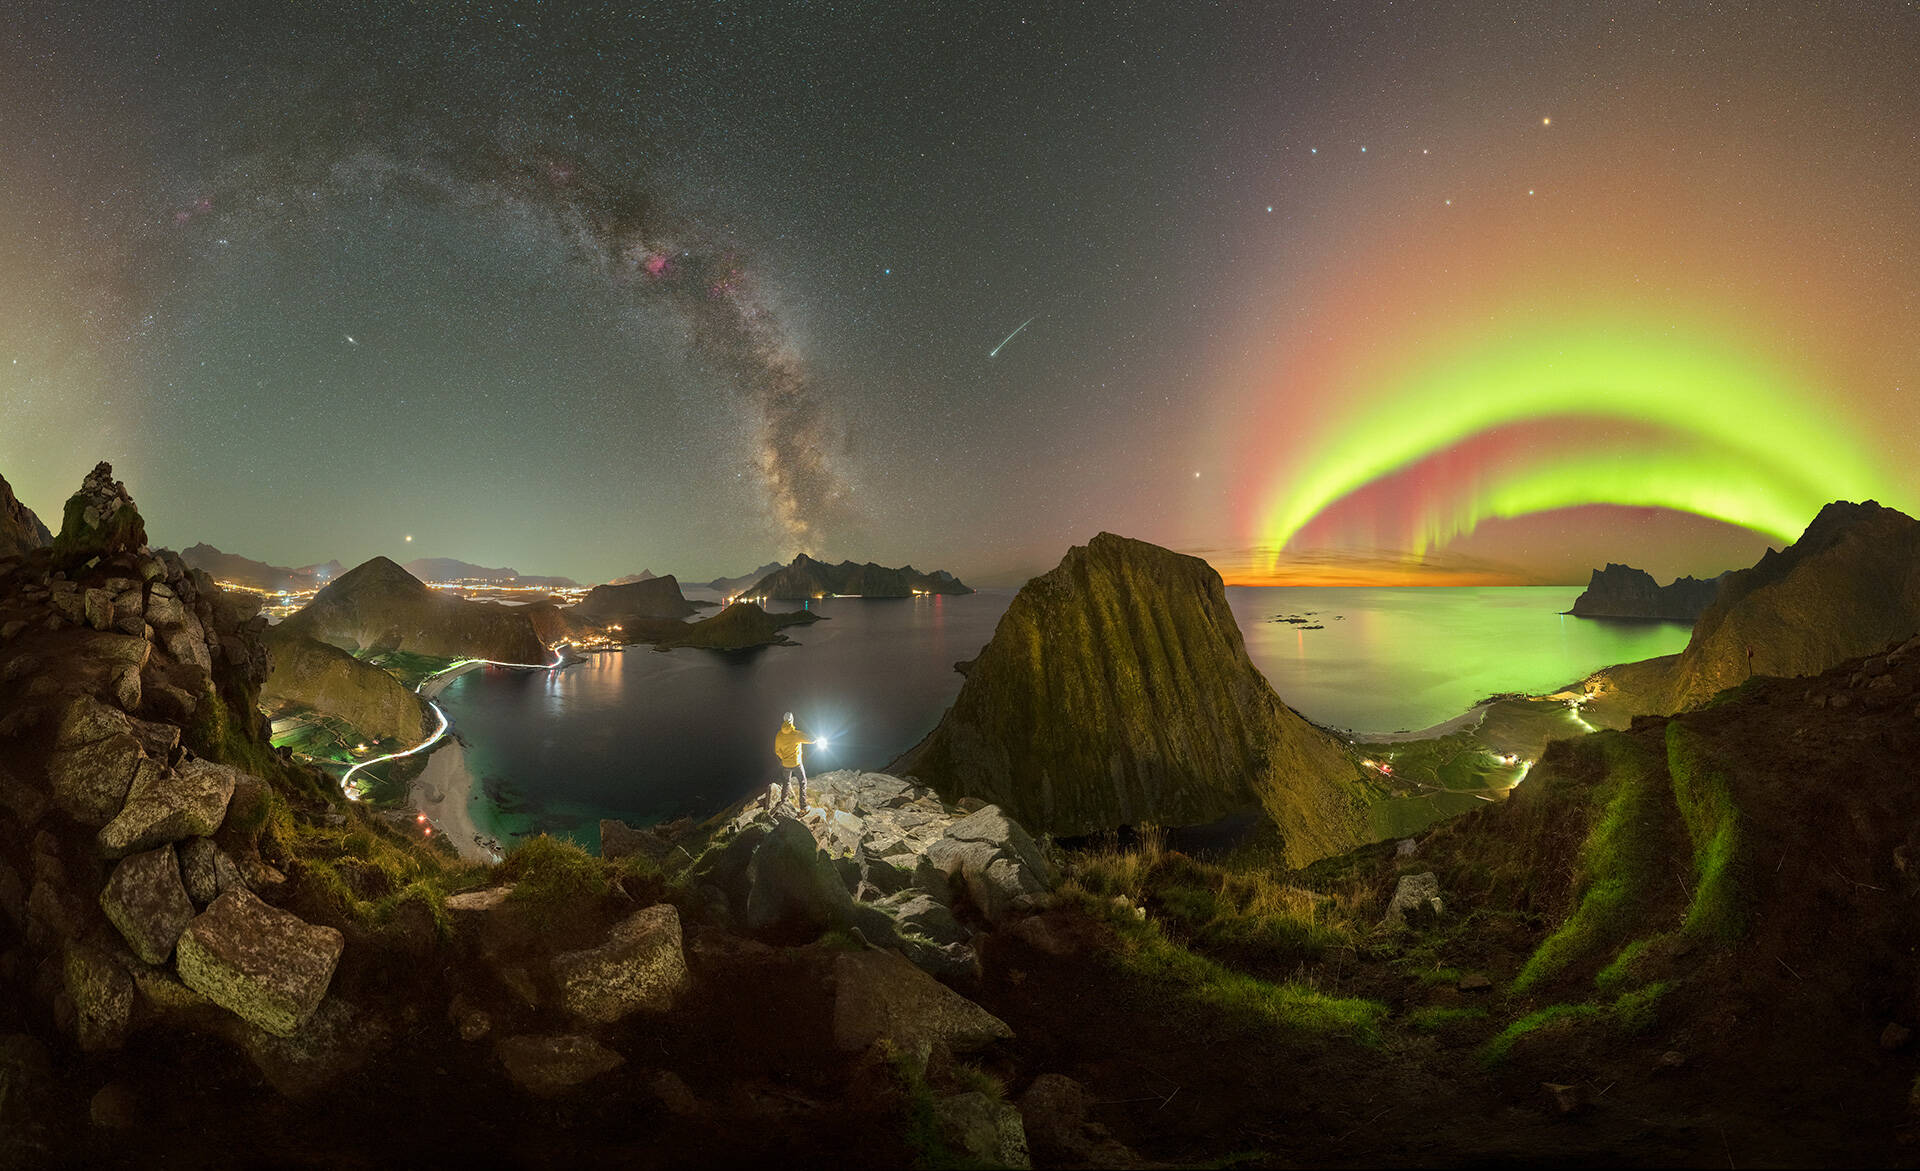 Milky Way arc seen to the left and and Aurora arc seen to the right of the image